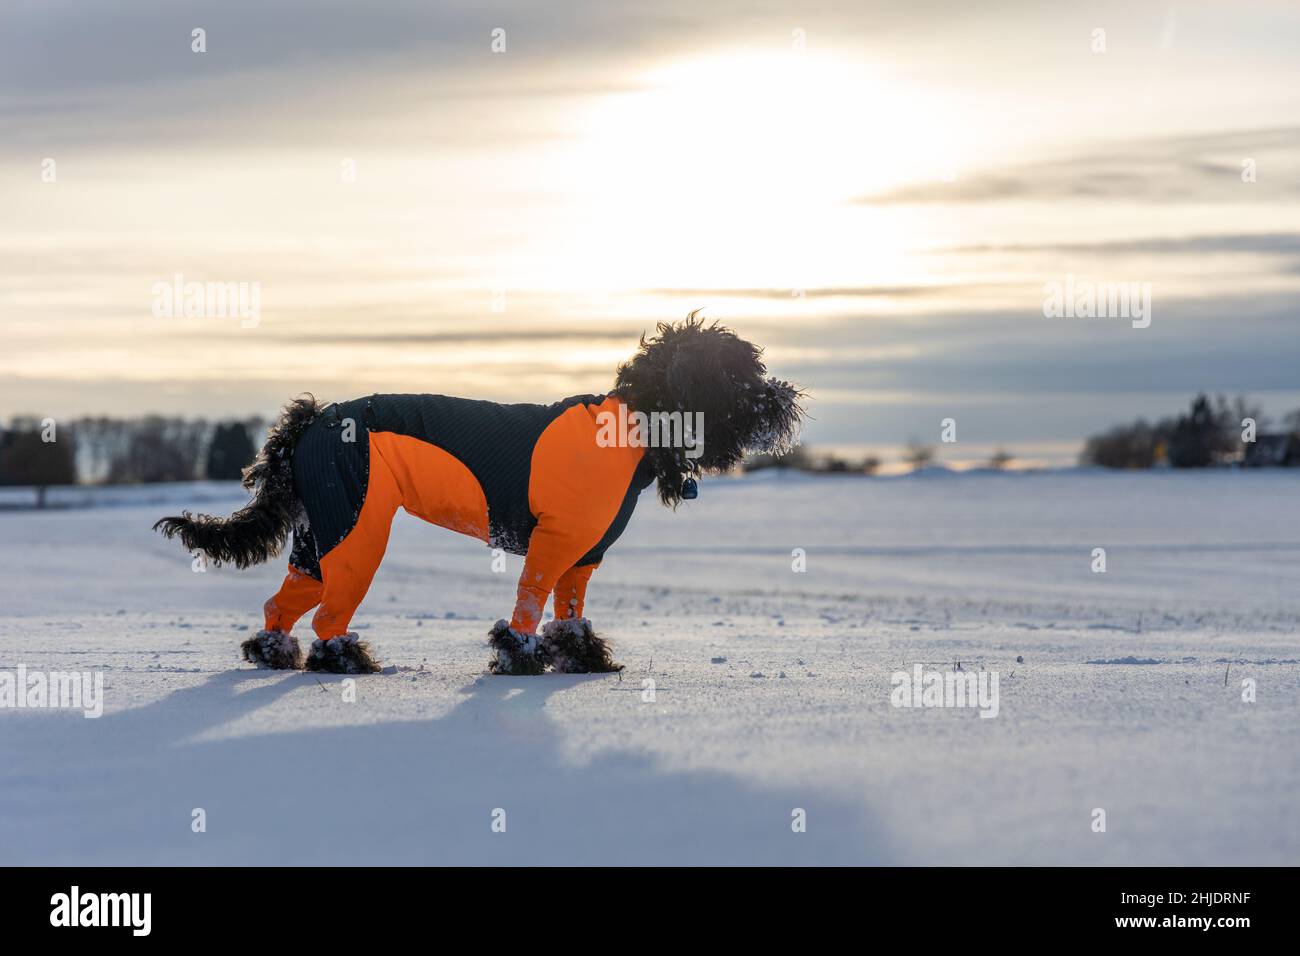 A black labradoodle dog in an orange protector cover is standing in white snowy winter landscape Stock Photo